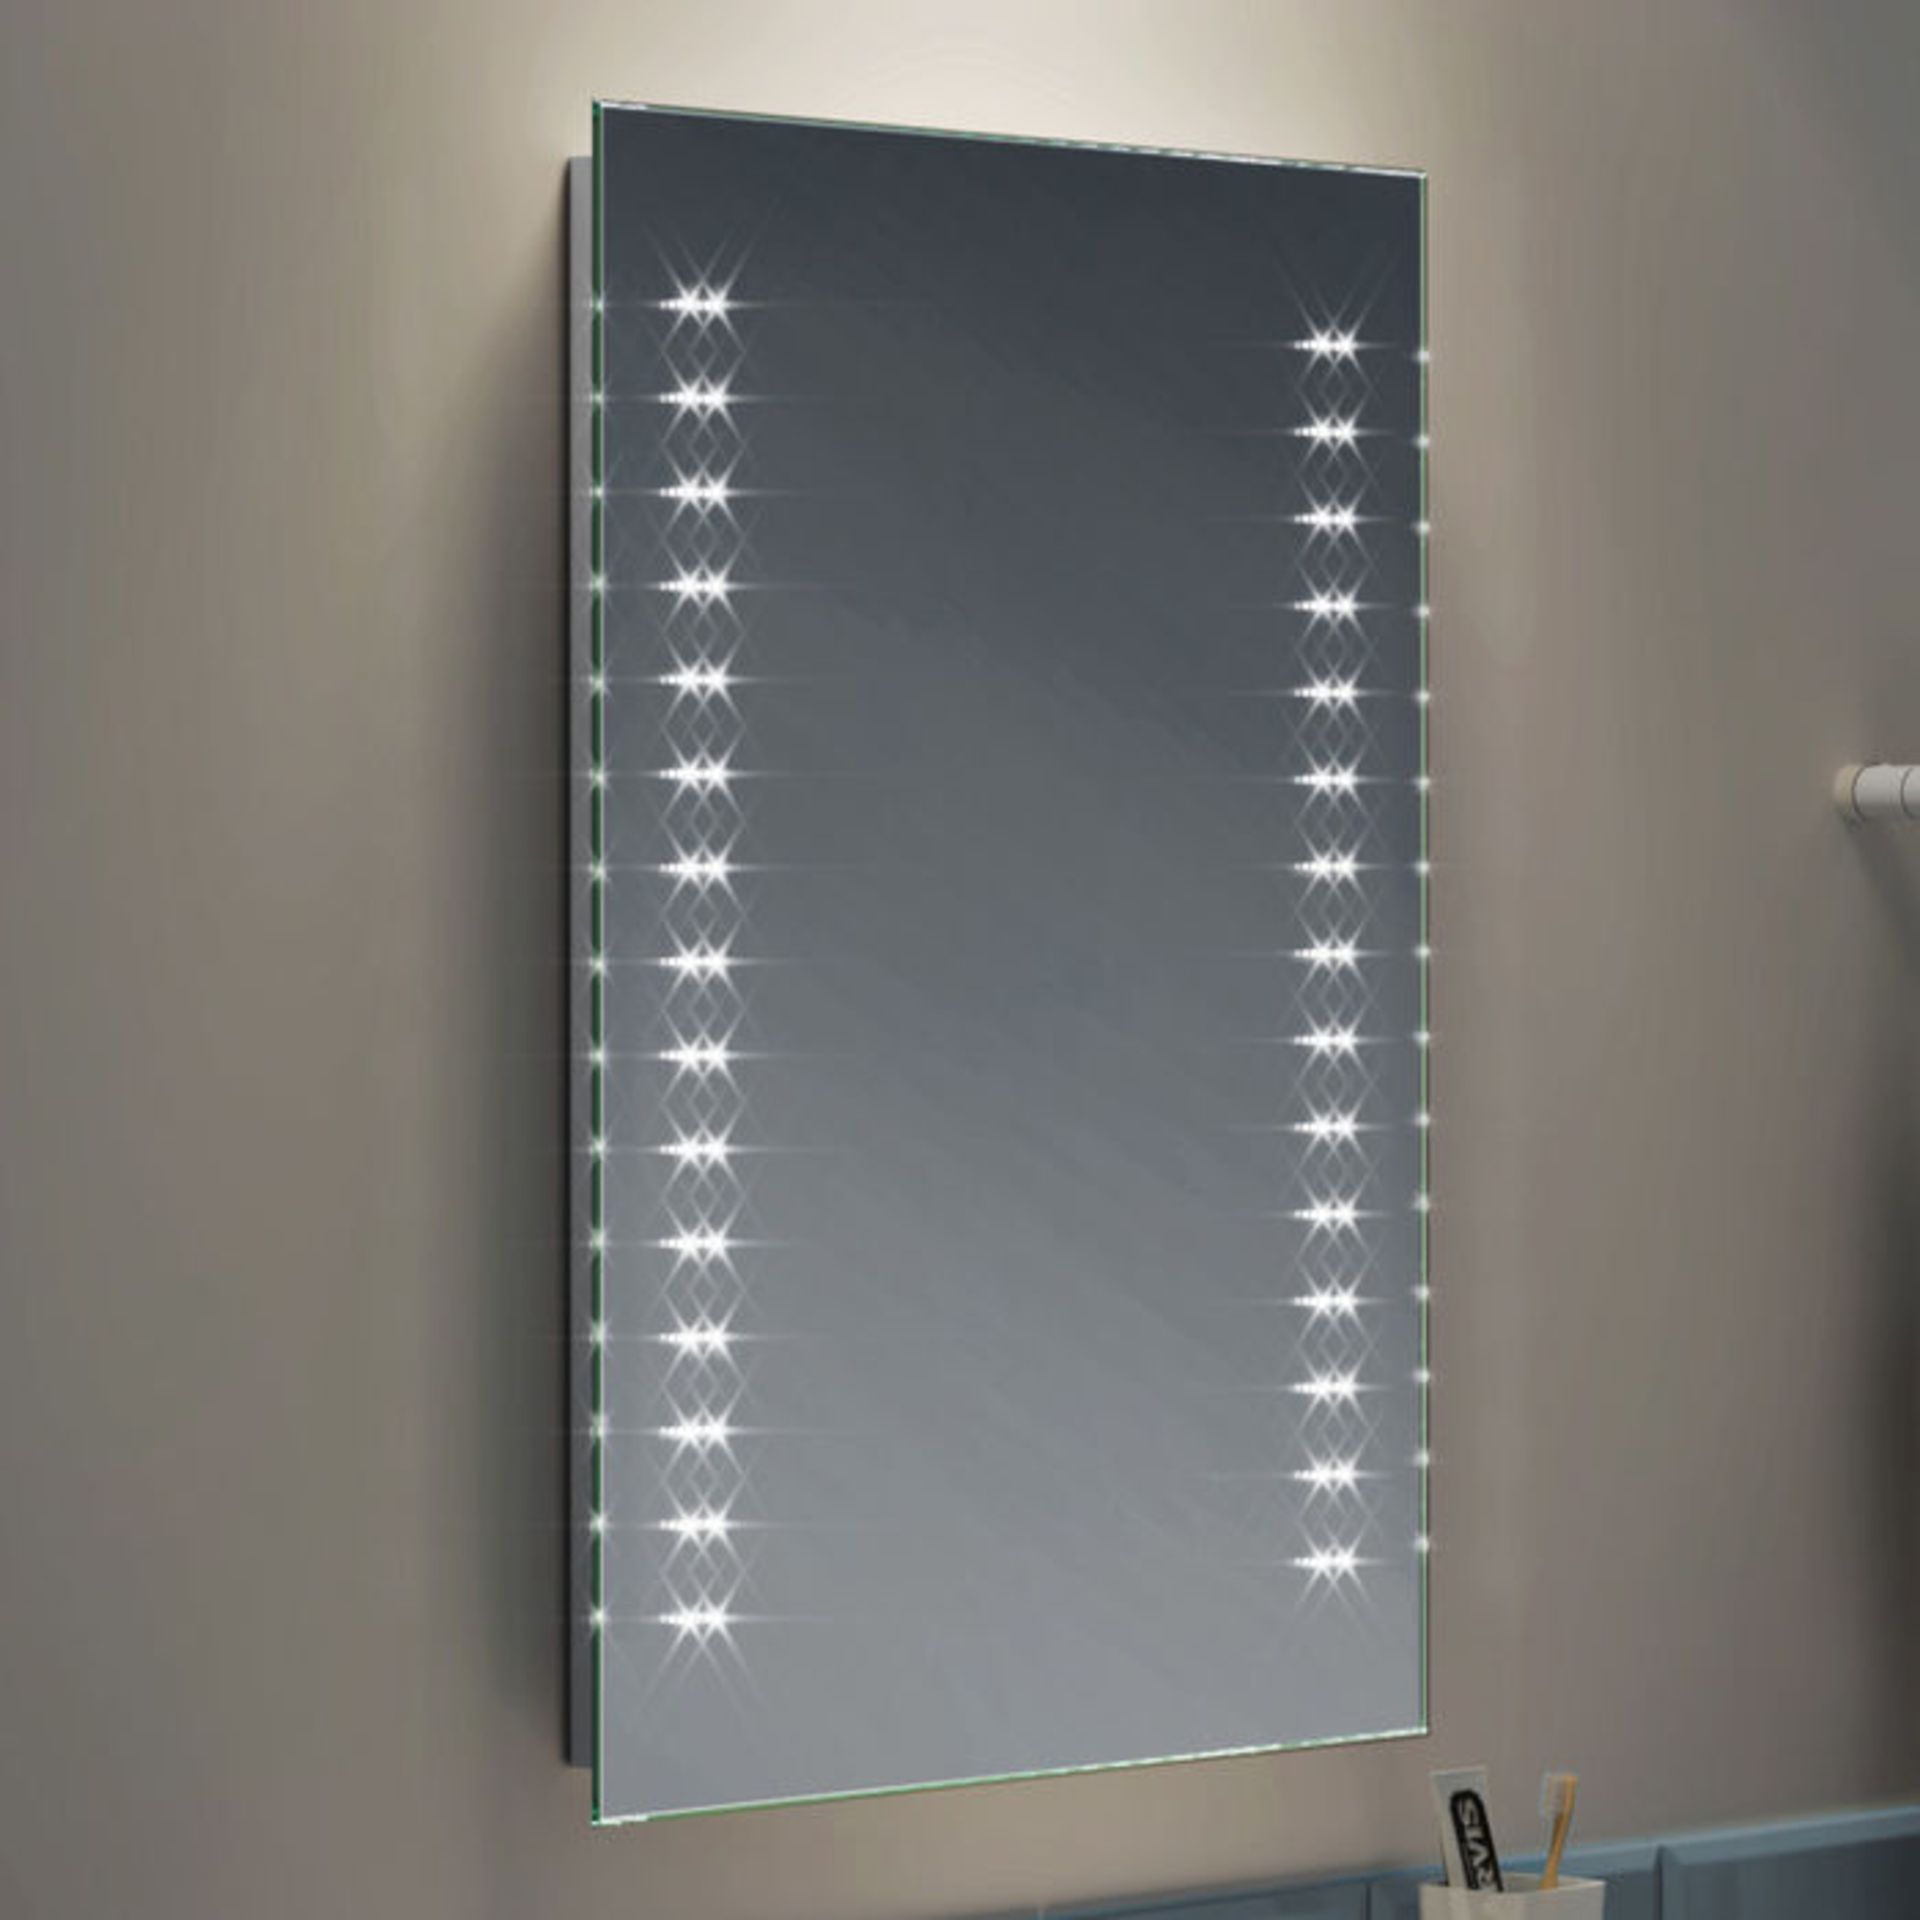 (T114) 500x700mm Galactic LED Mirror - Battery Operated. Energy saving controlled On / Off